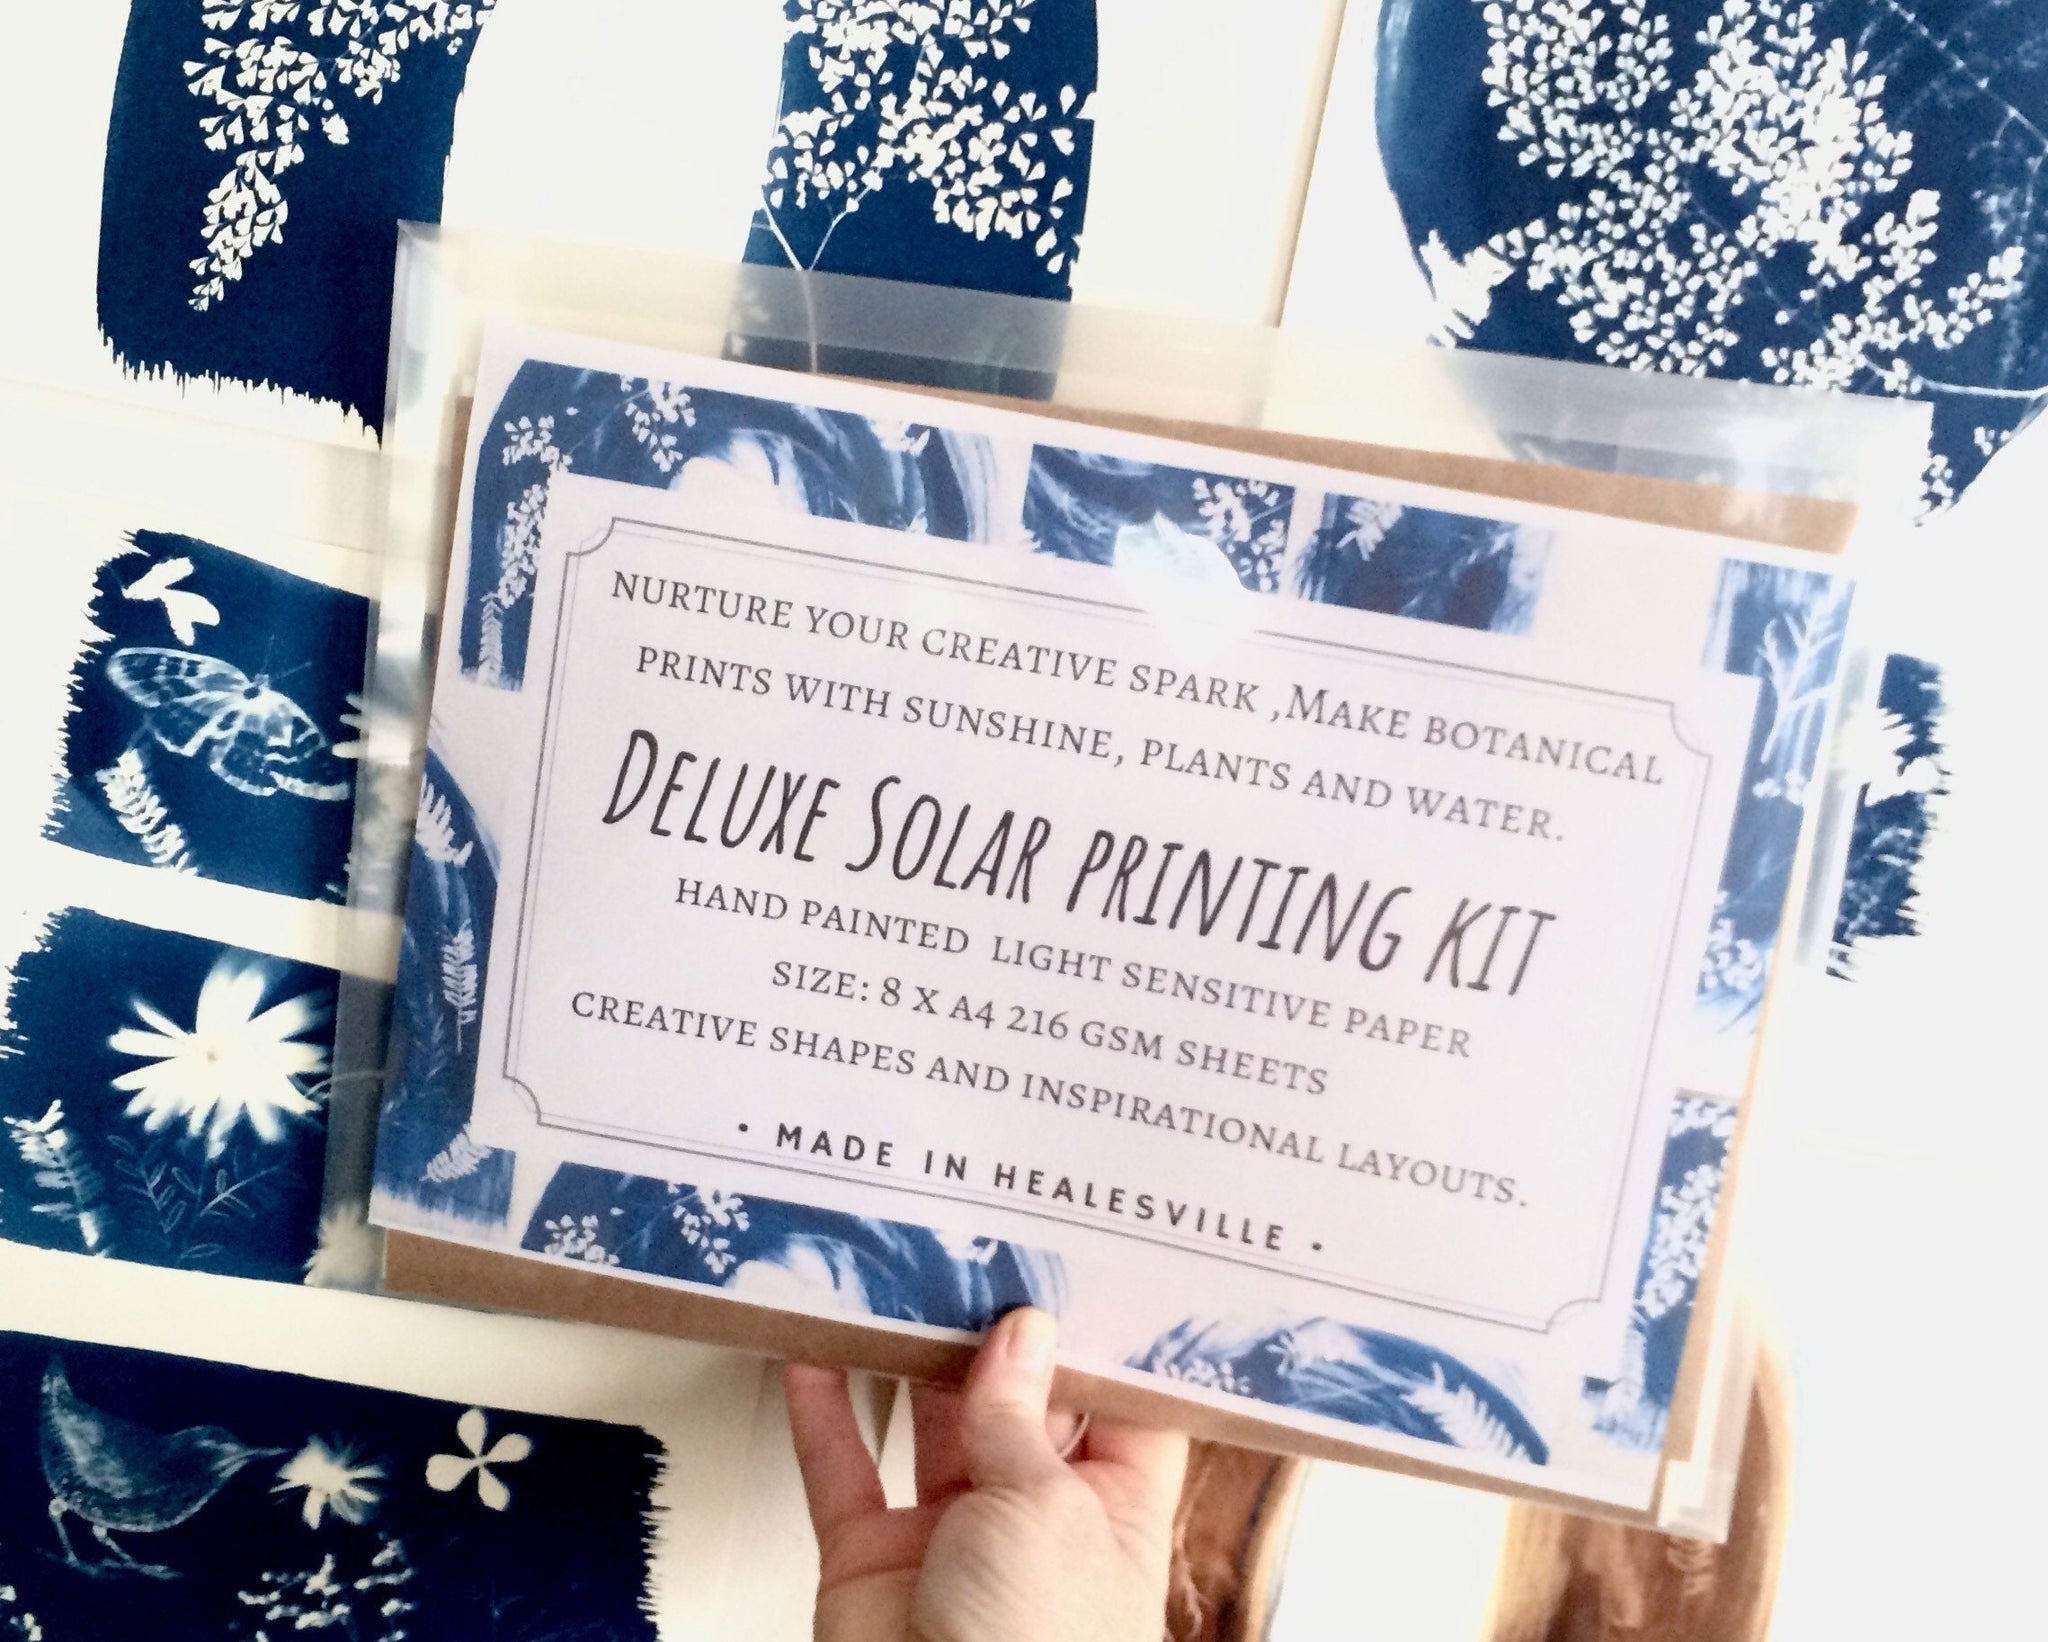 Get creative with a cyanotype kit - Gathered